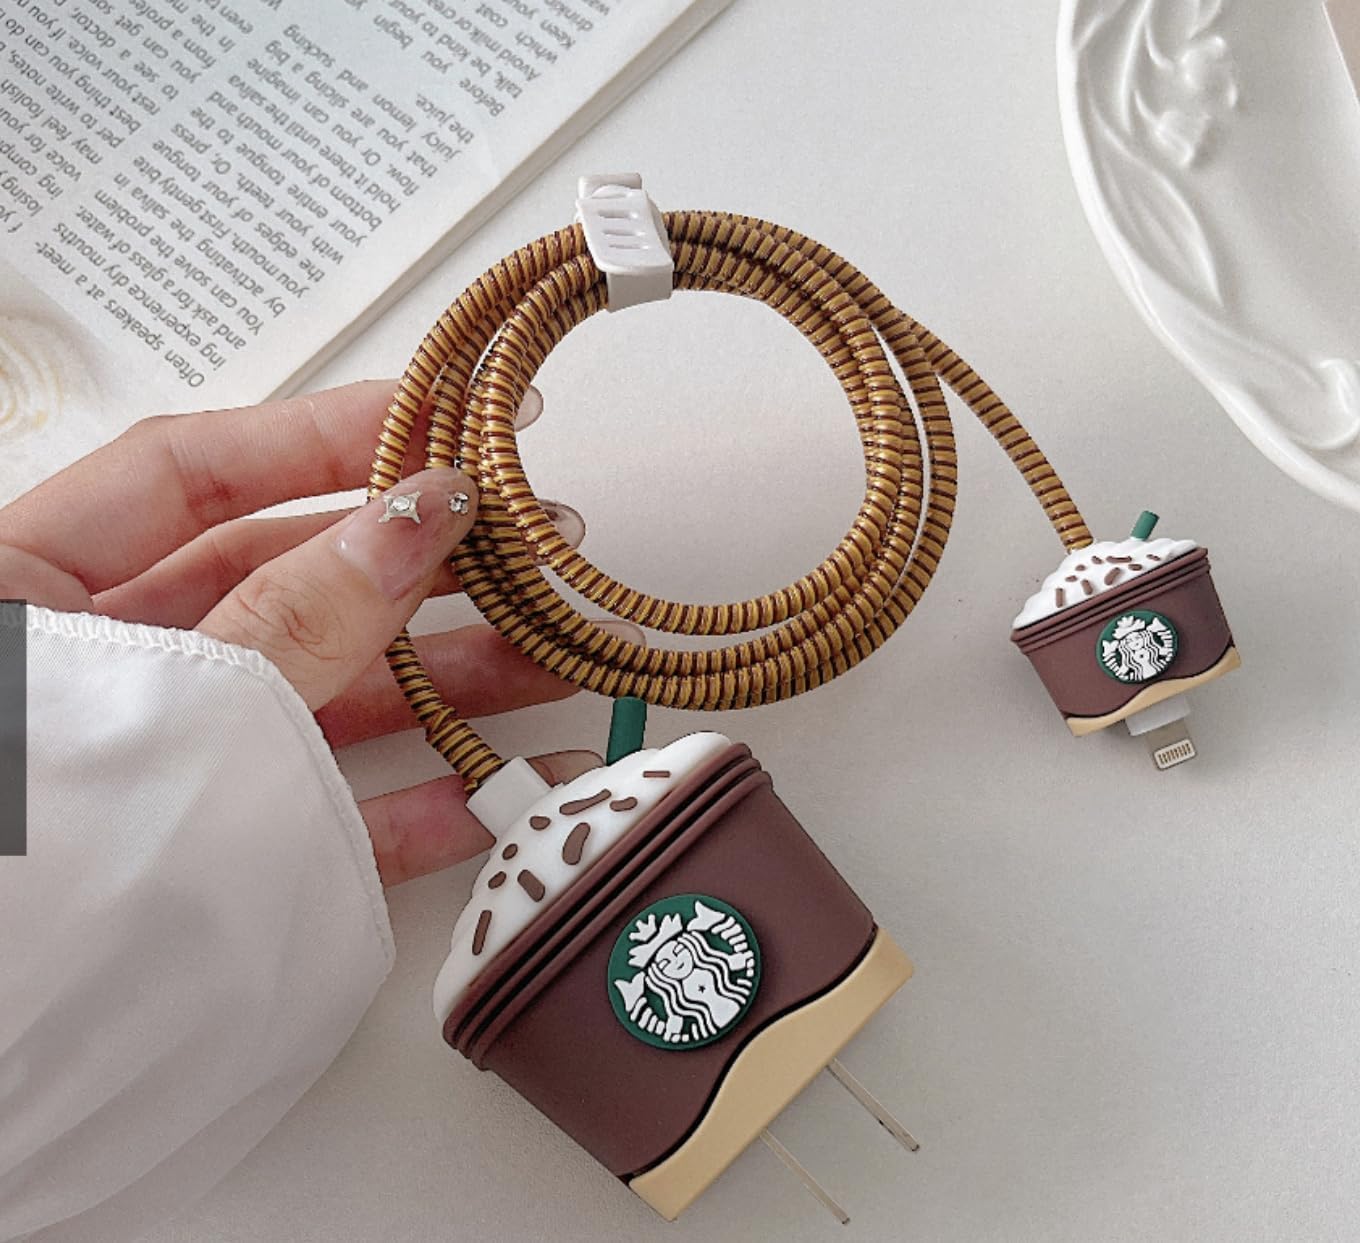 Iphone Charger Case Cover - Starbucks Cappuccino Lover